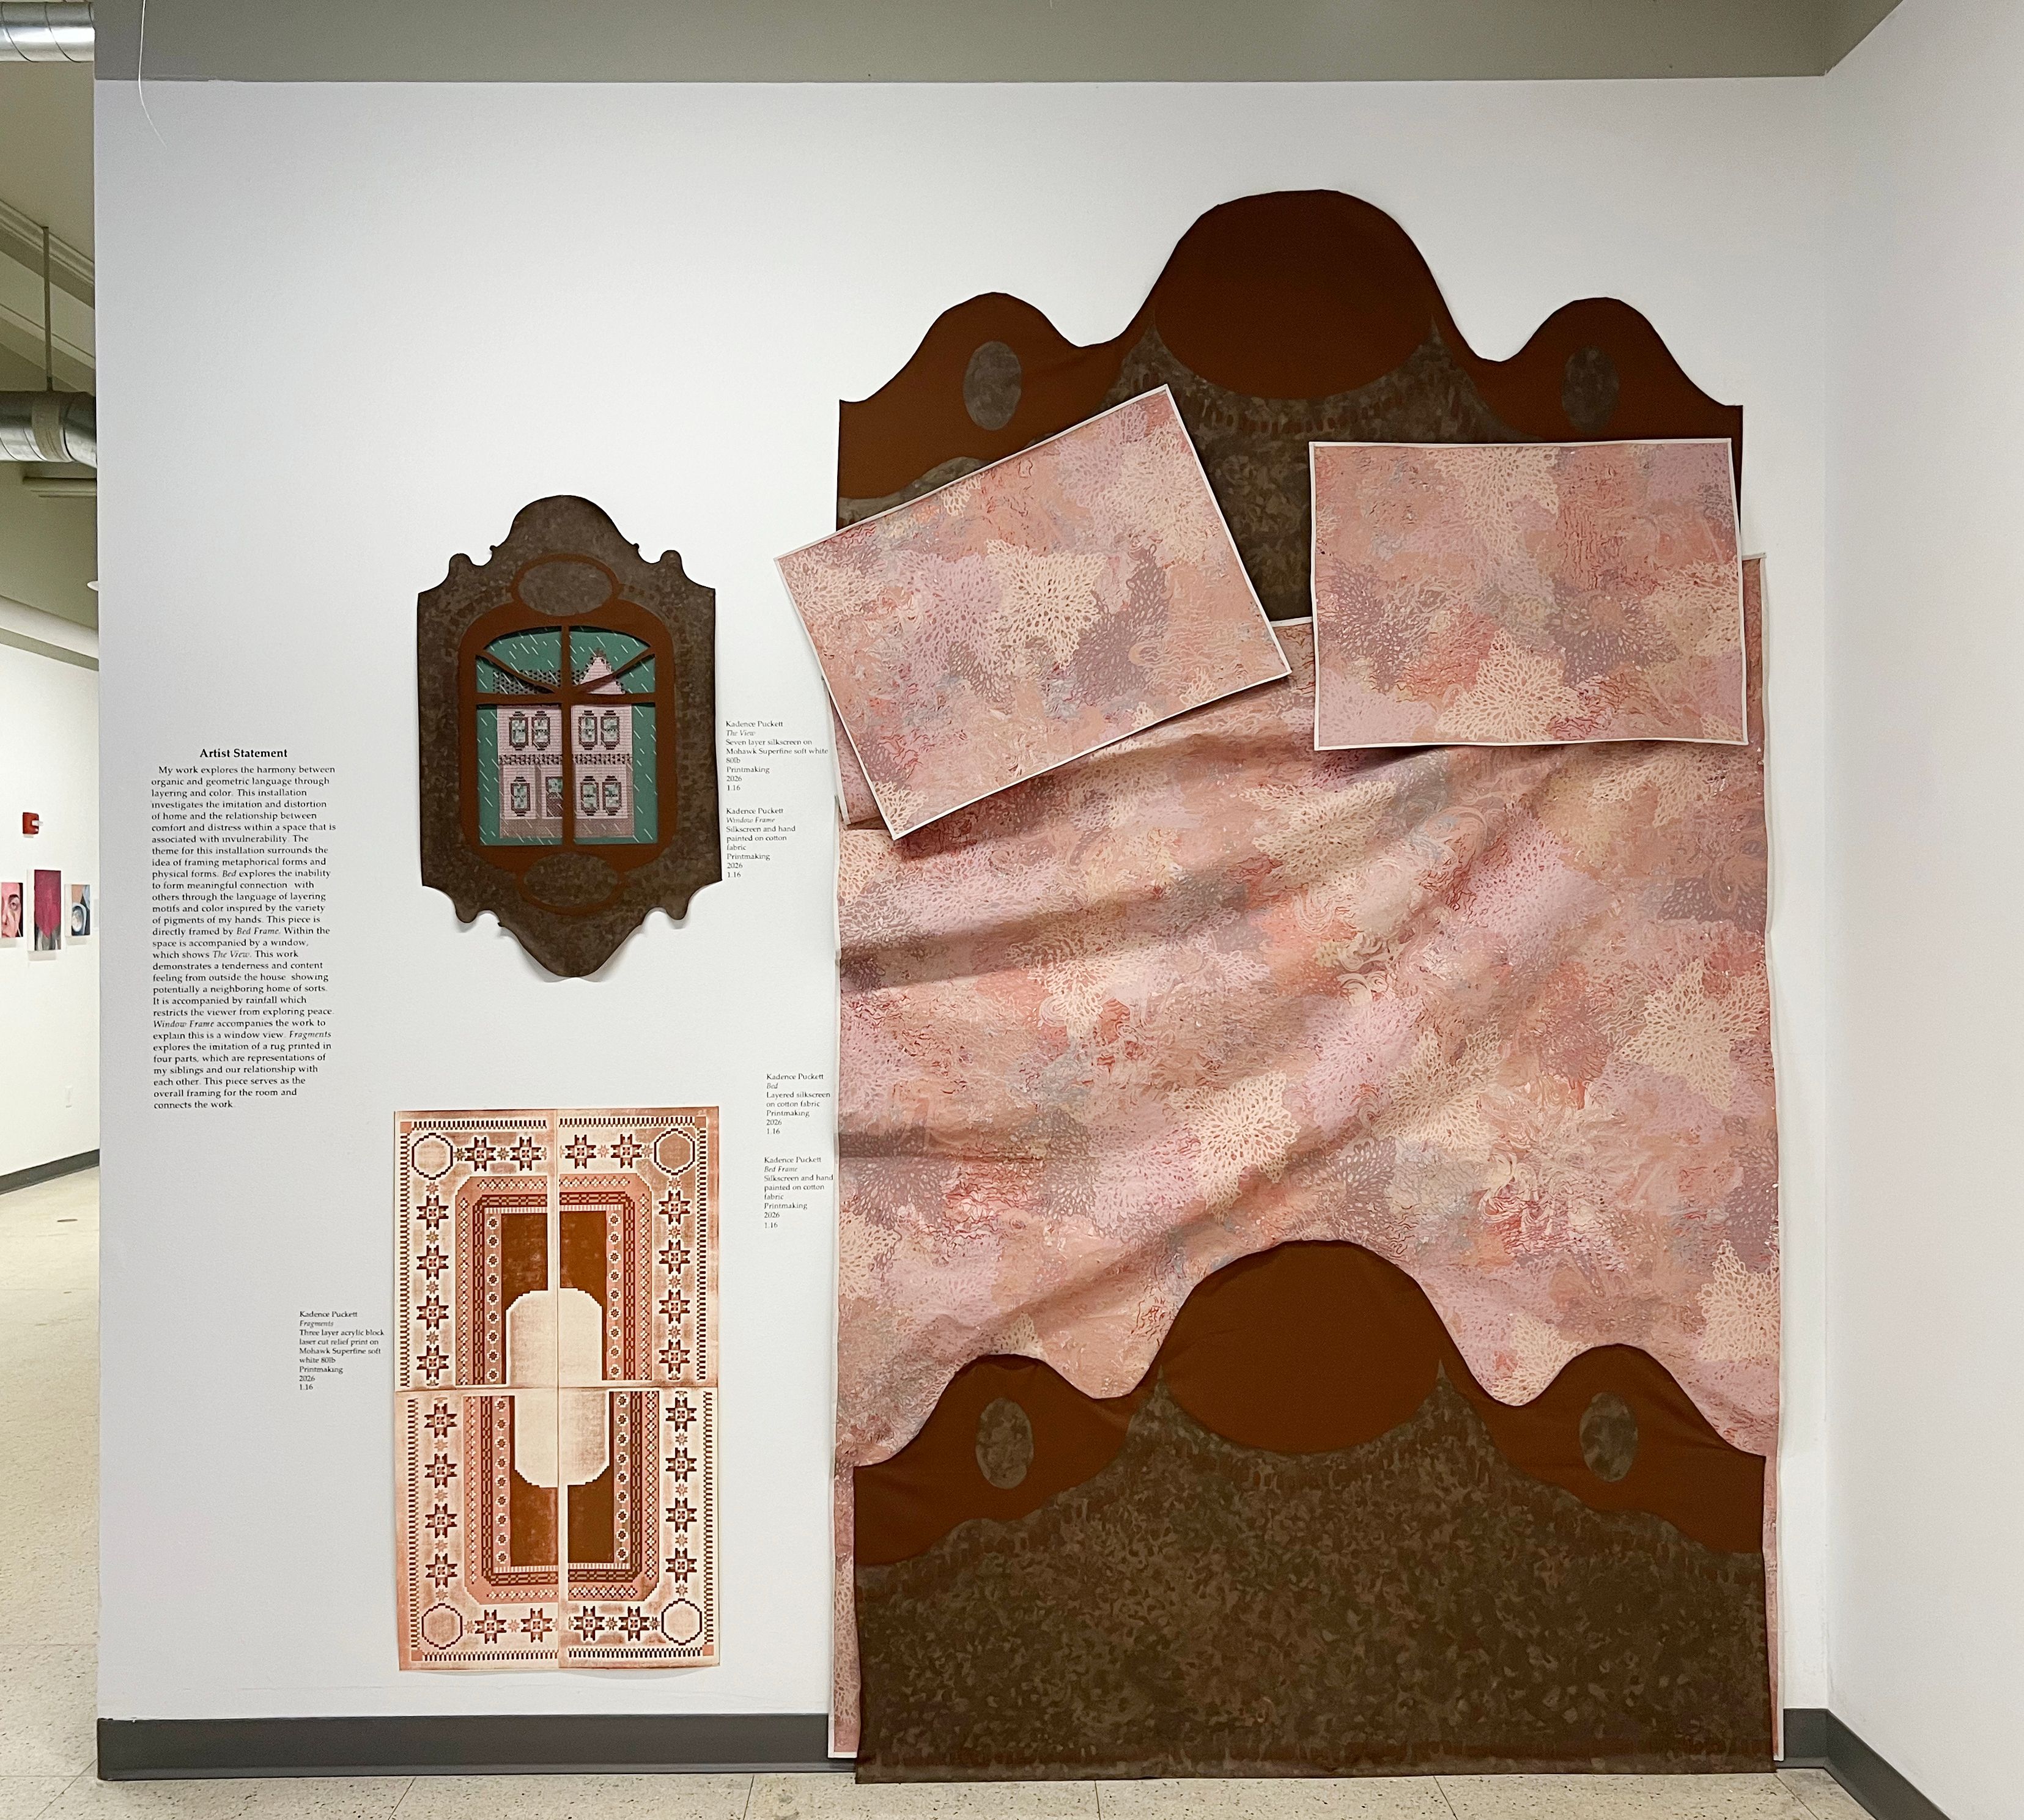 An installation of prints, resembling a beg, a carpet, and a window.